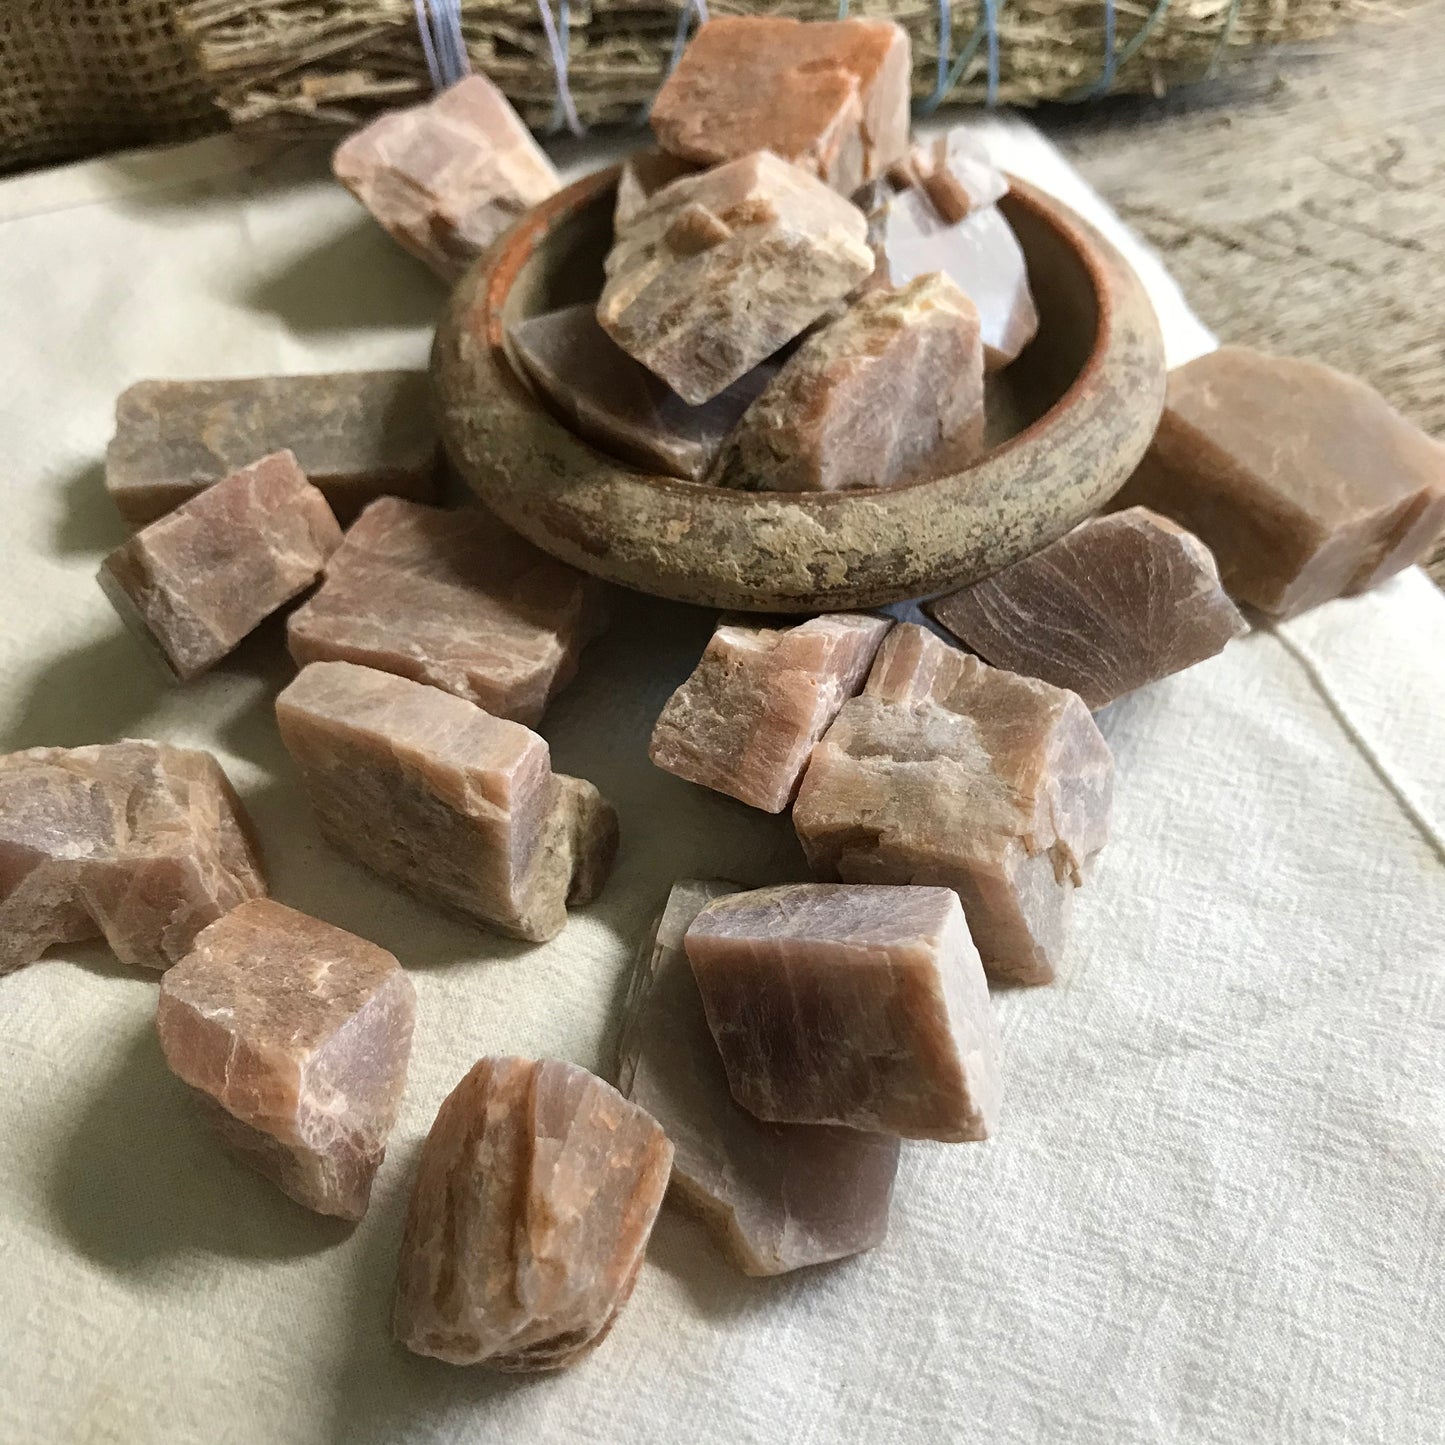 Raw Peach Moonstone, One Crystal (Approx 1 1/2"), Peach Stones, Supply for Crystal Grid or Crafts 0190